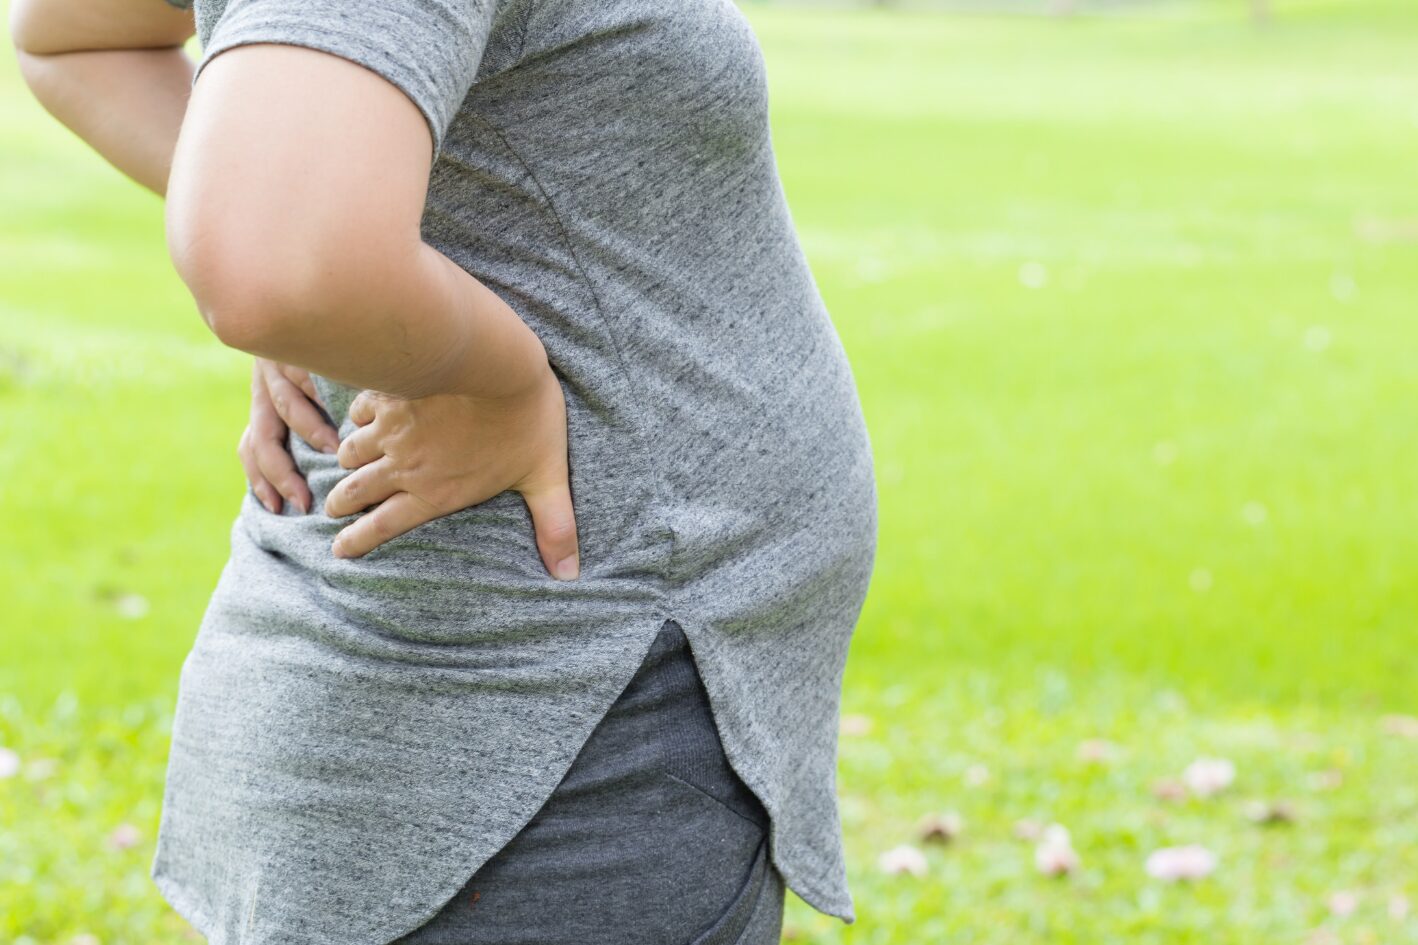 About Pregnancy Back Pain  The Brisbane Spine Clinic